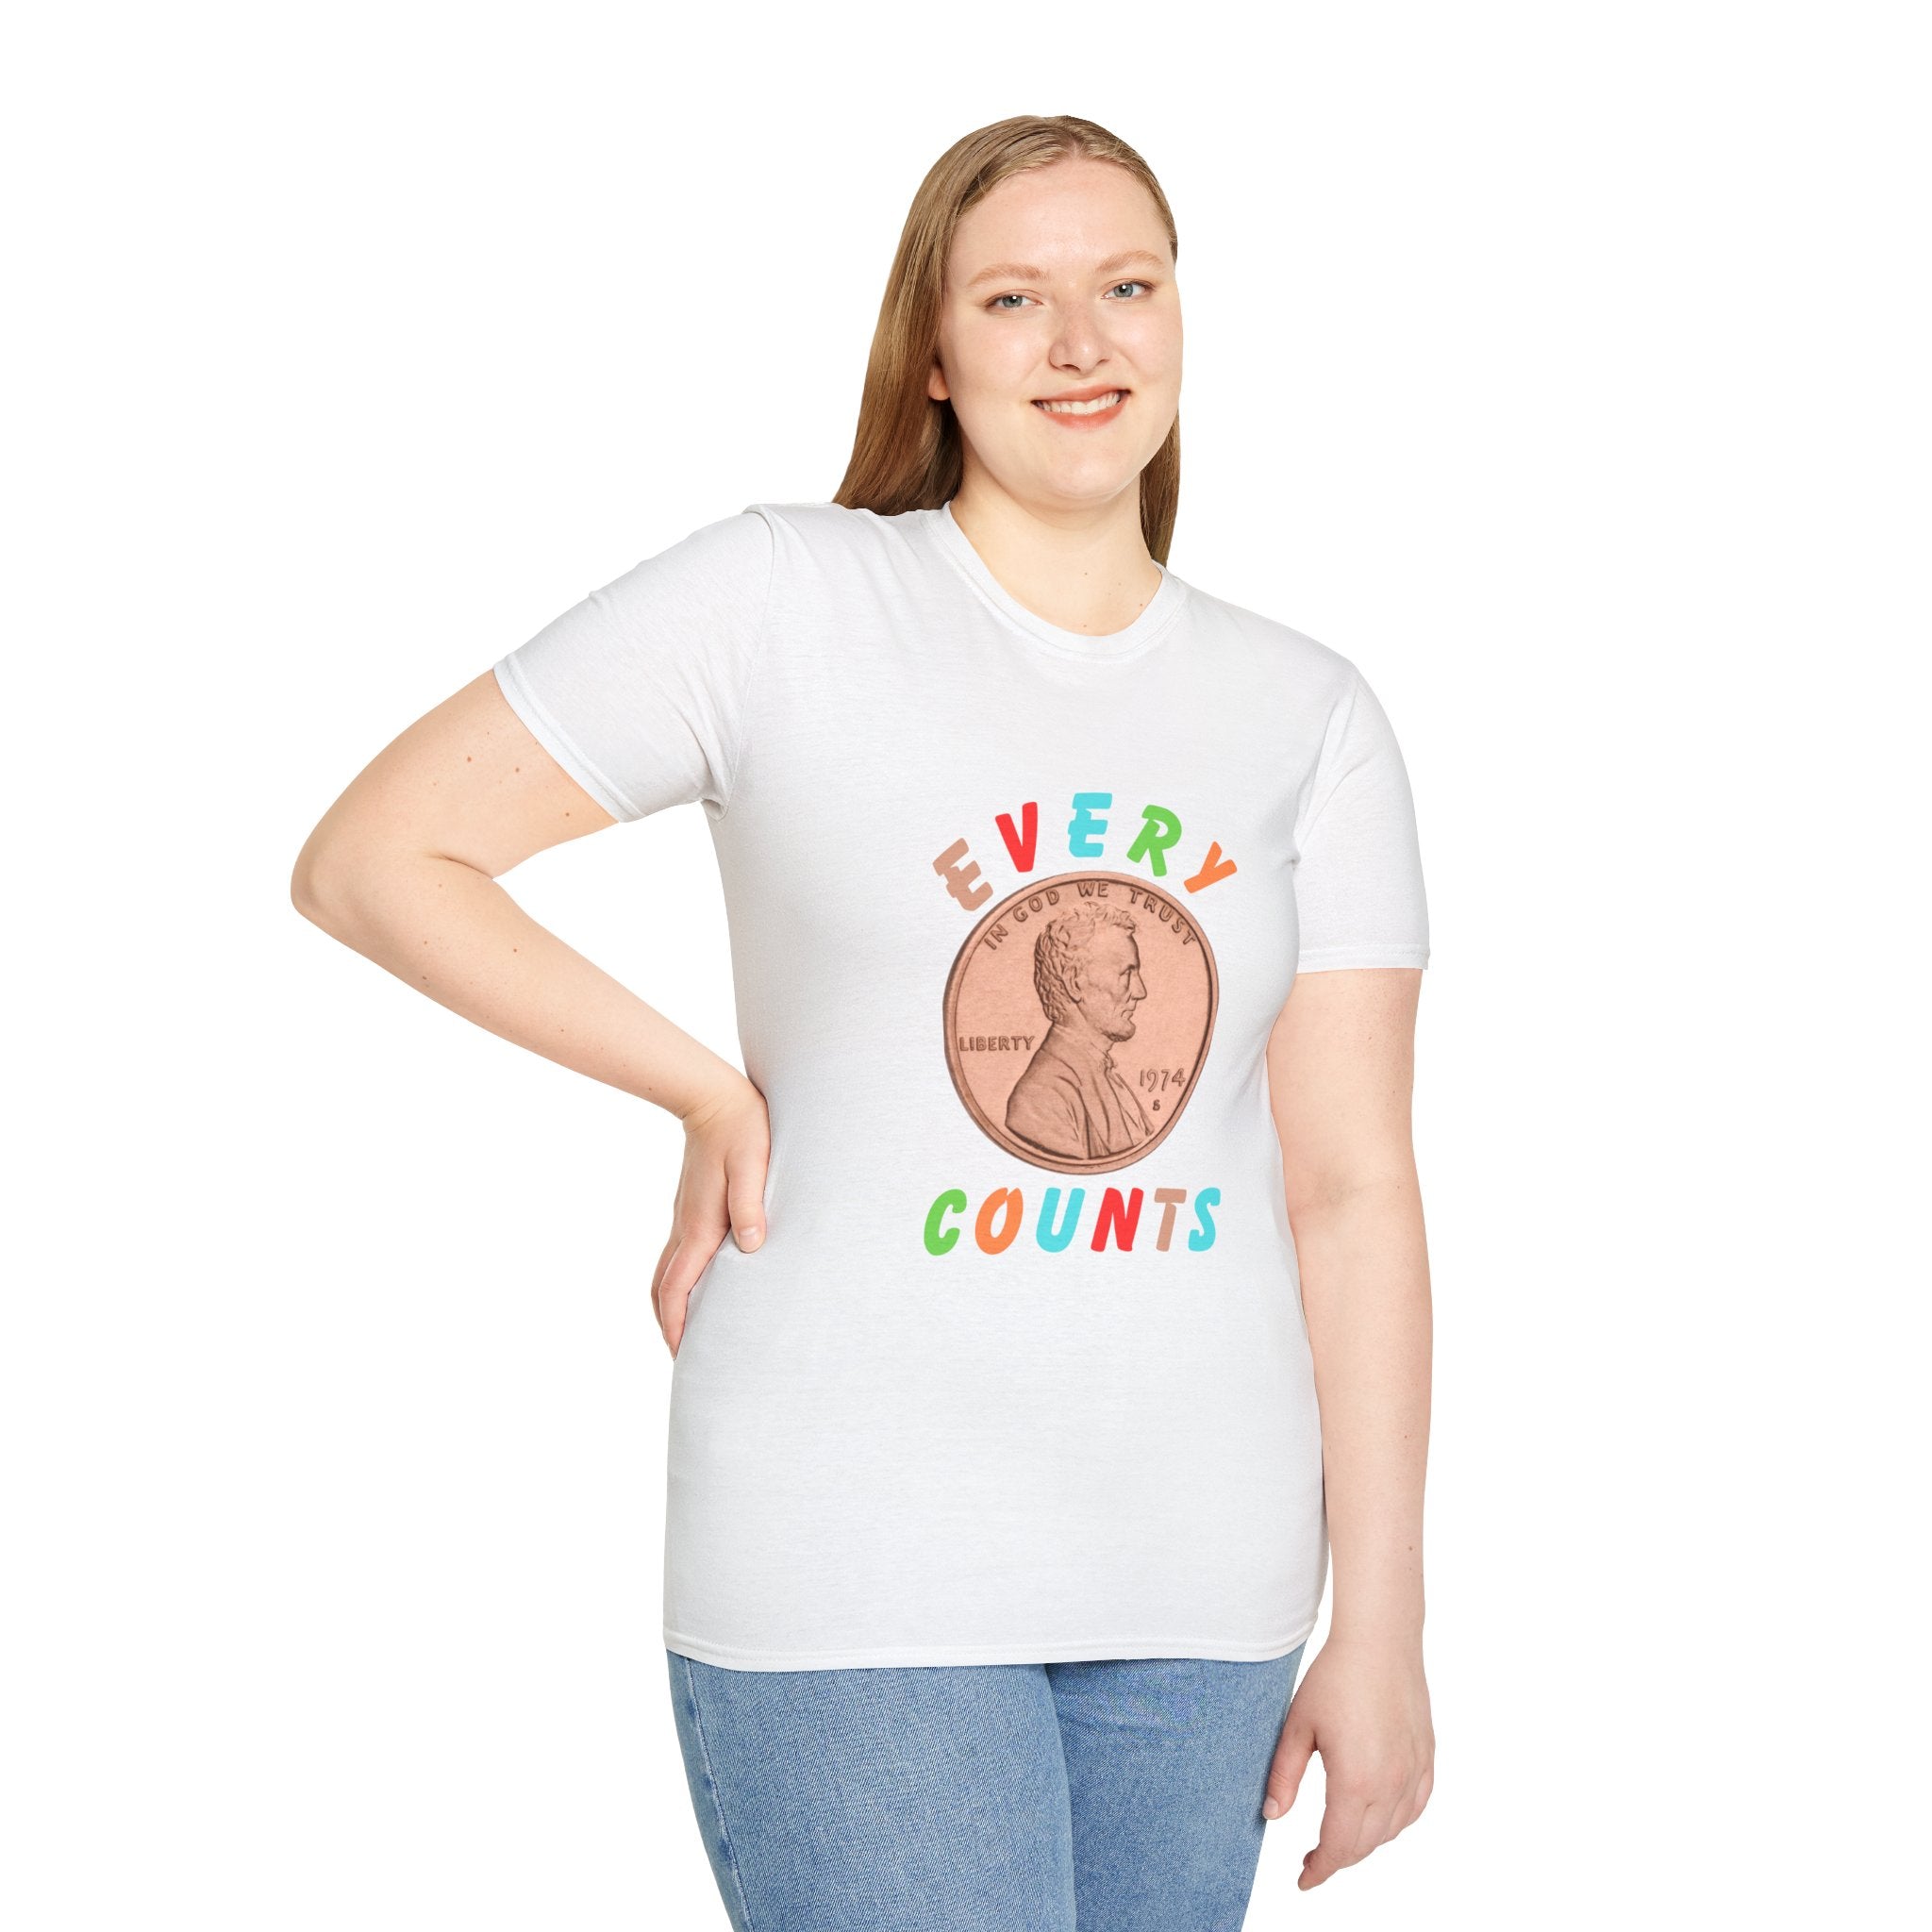 Every Penny Counts Unisex Softstyle T-Shirt, Women's T-Shirt, Men's T-Shirt, Gift for Women, Gift for Men